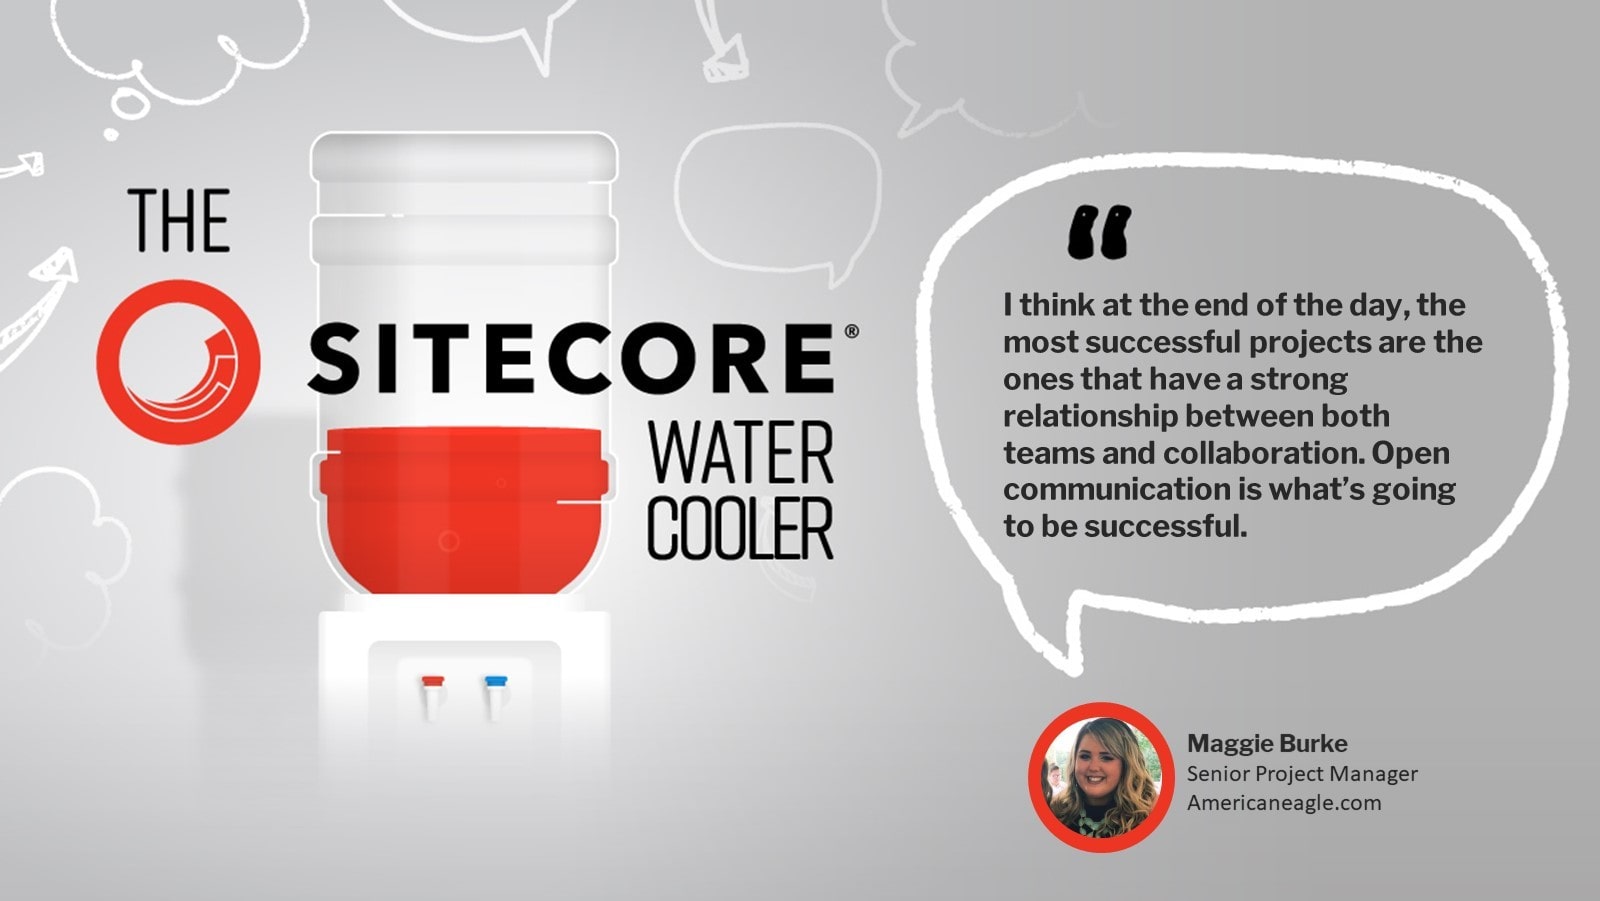 Maggie Burke gives tips on how to build a successful Sitecore team